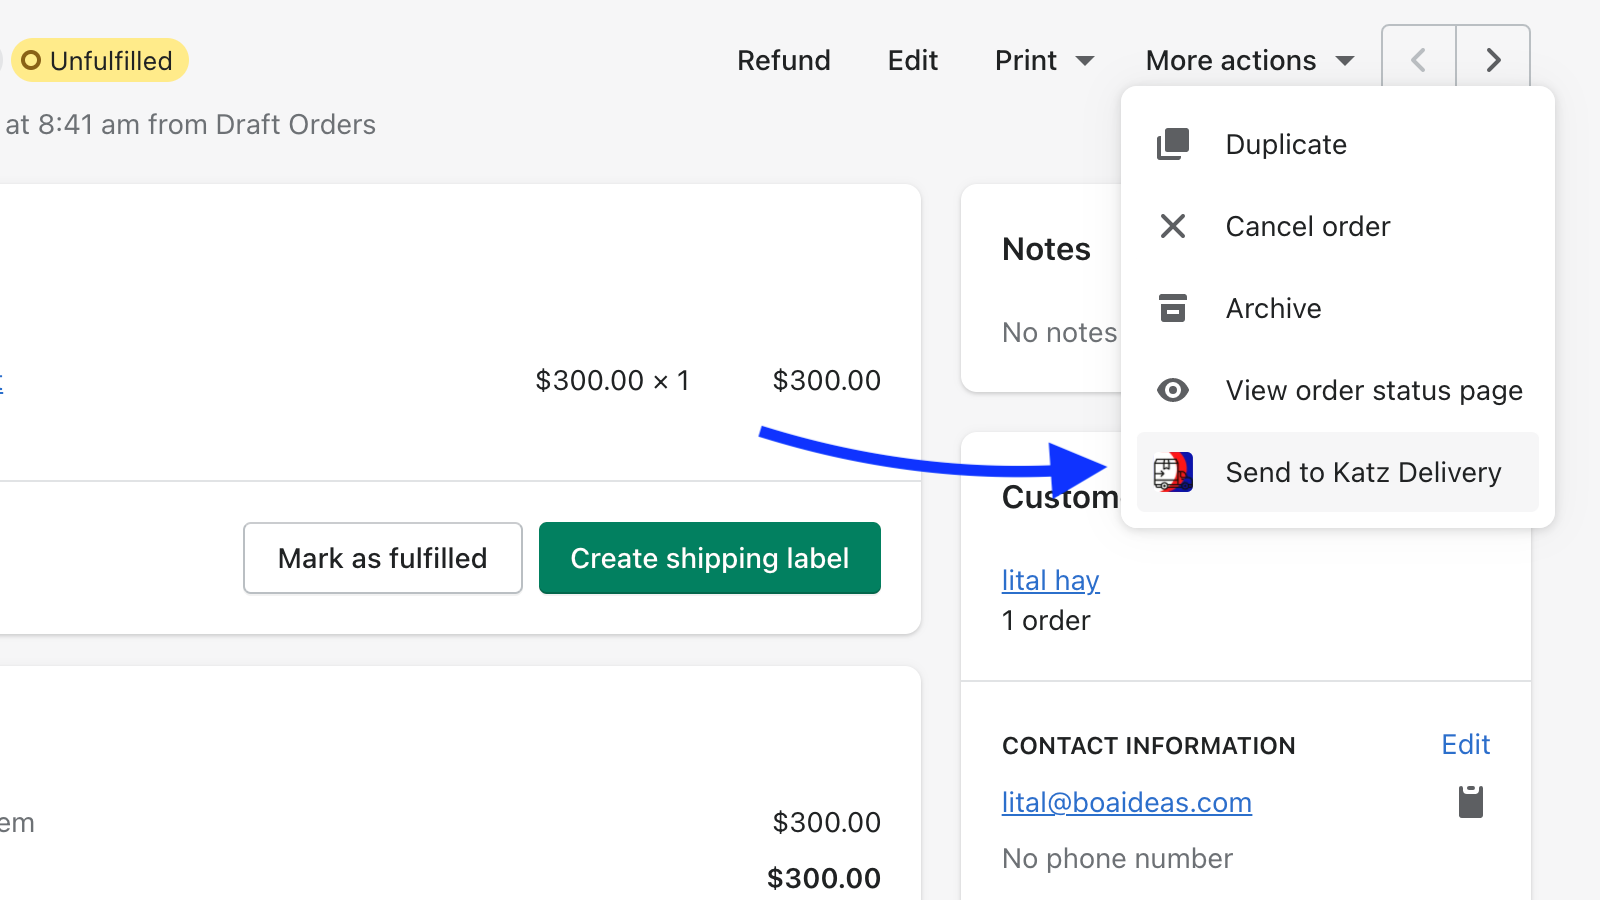 Generate your Katz shipments directly from the order view